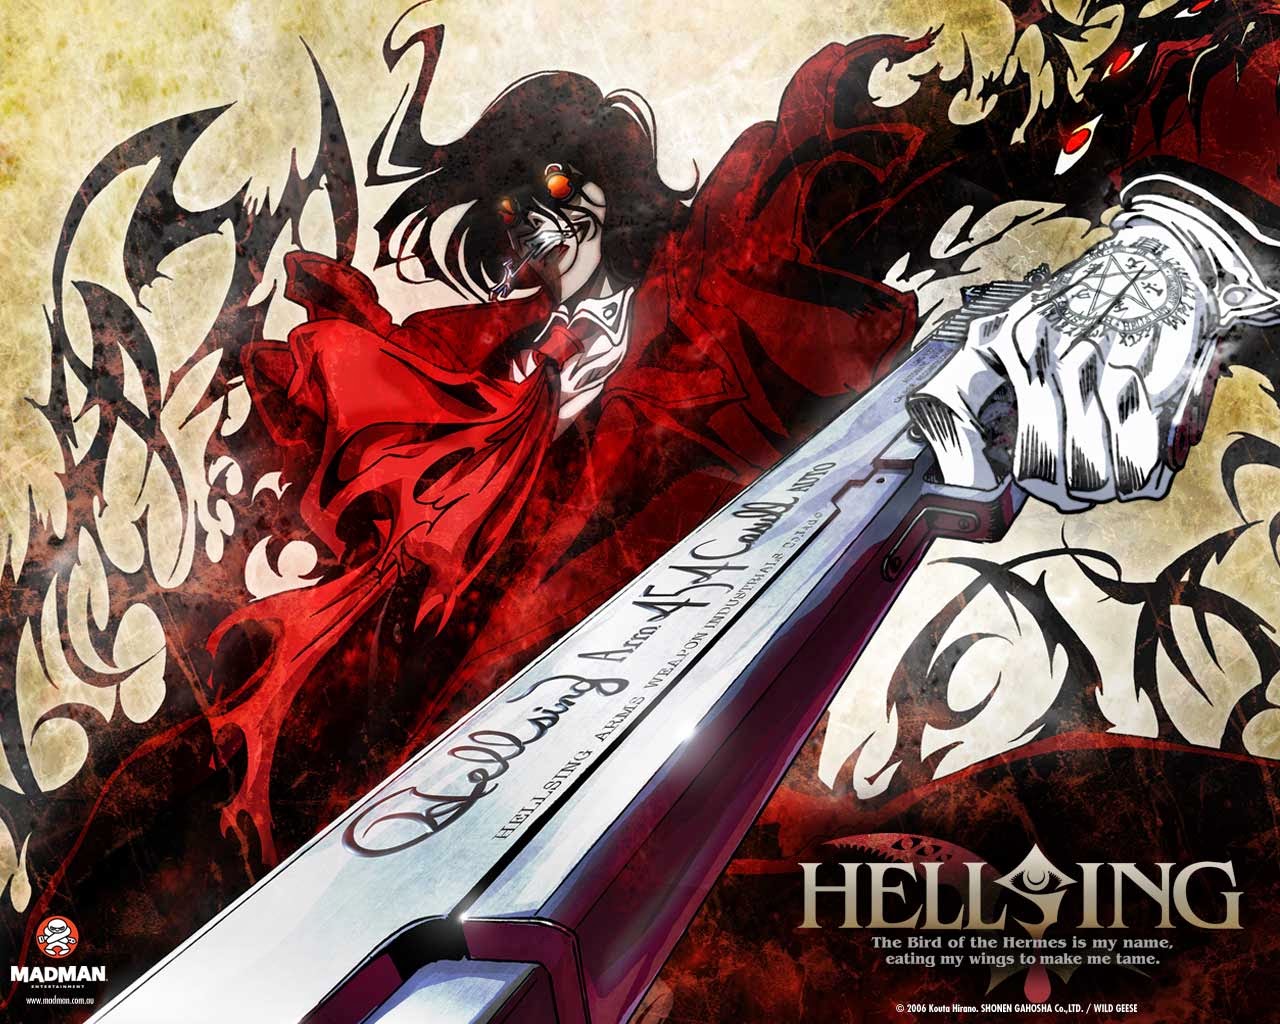 How different is Hellsing Ultimate from the original Hellsing? - Quora